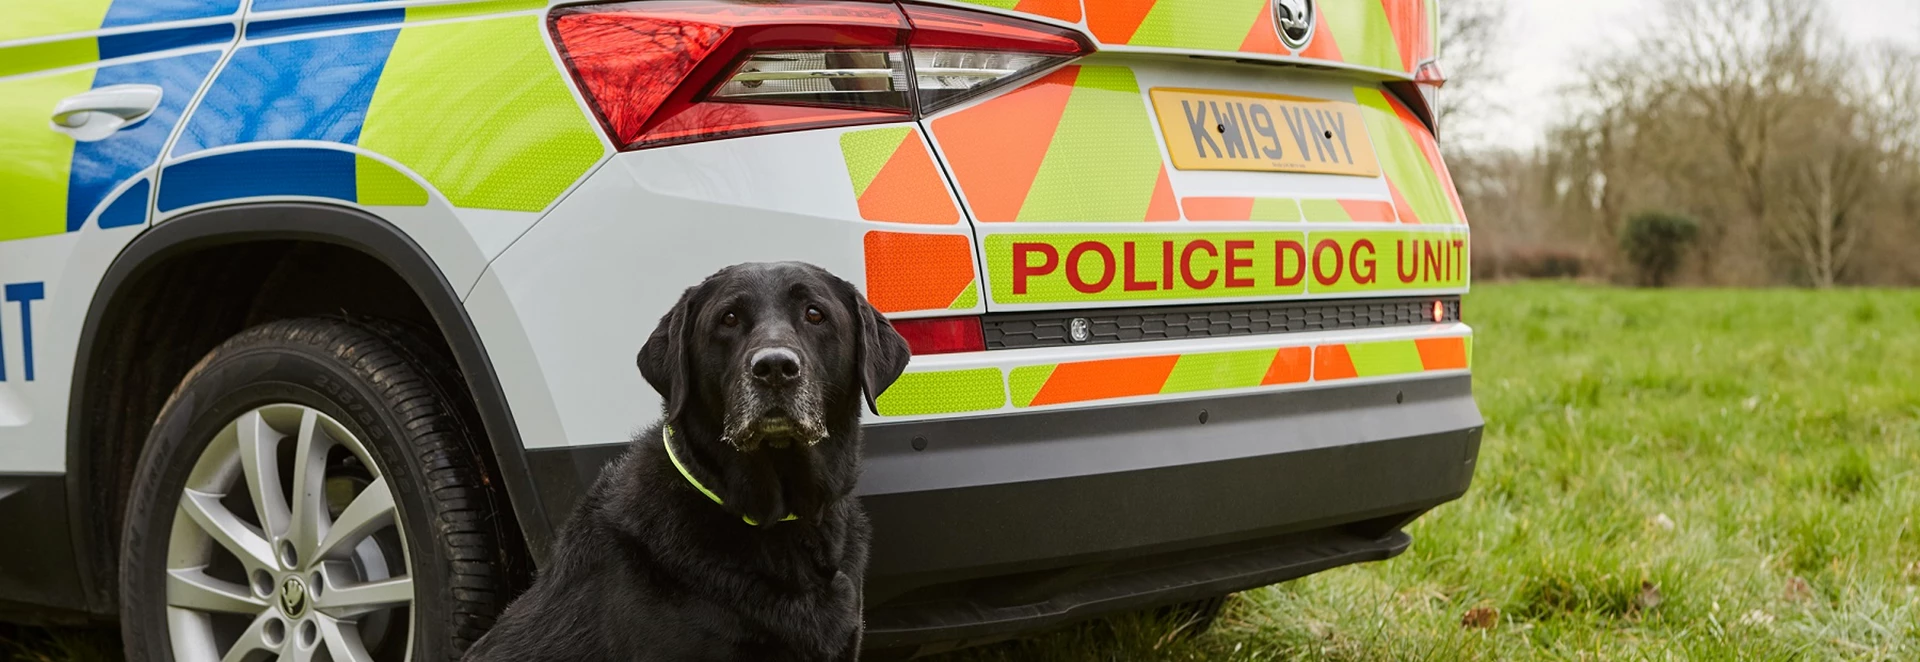 Skoda Kodiaq now equipped for paw-patrolled police duties